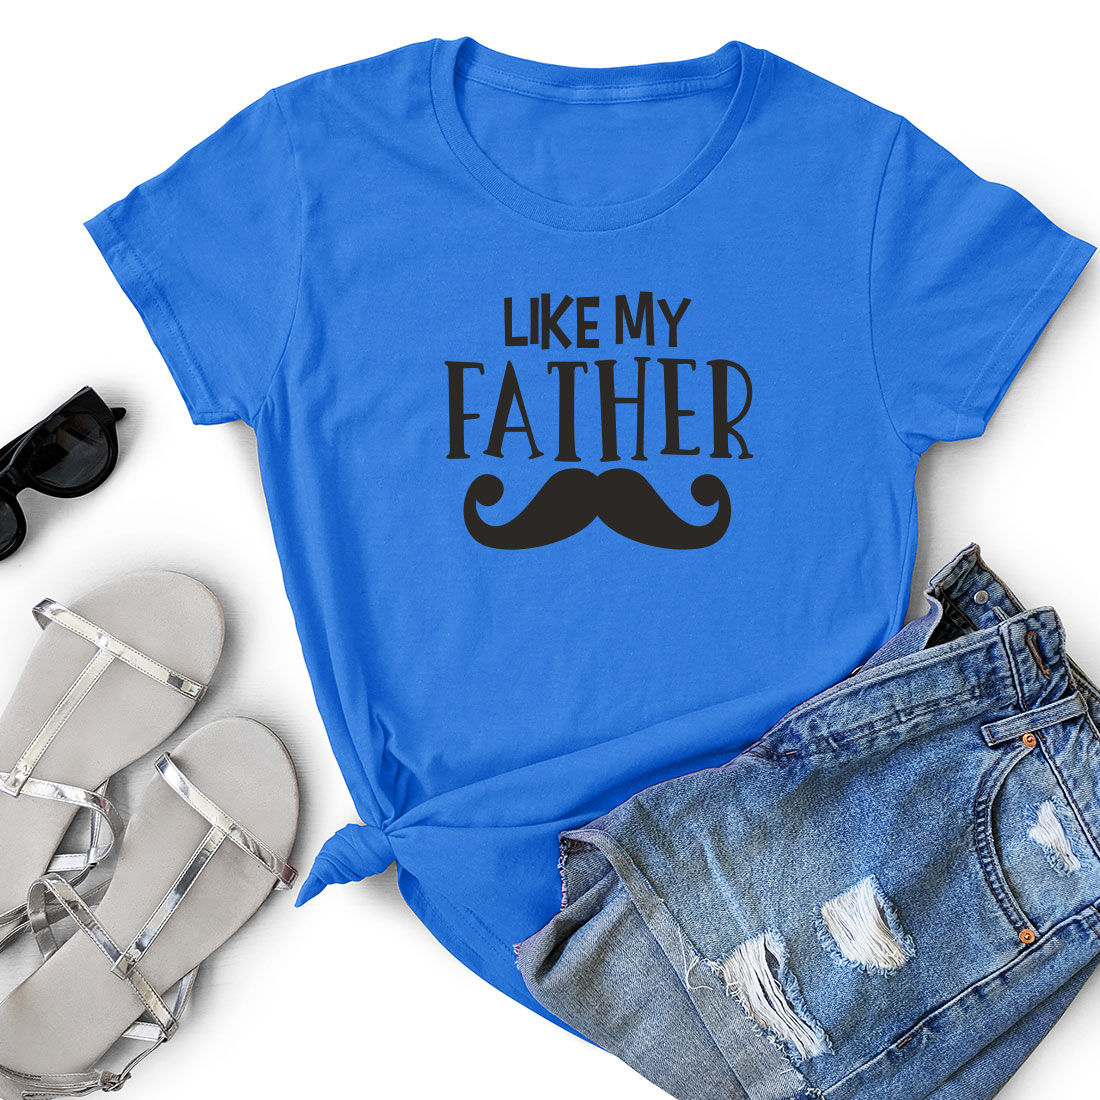 T - shirt that says like my father with a moustache on it.